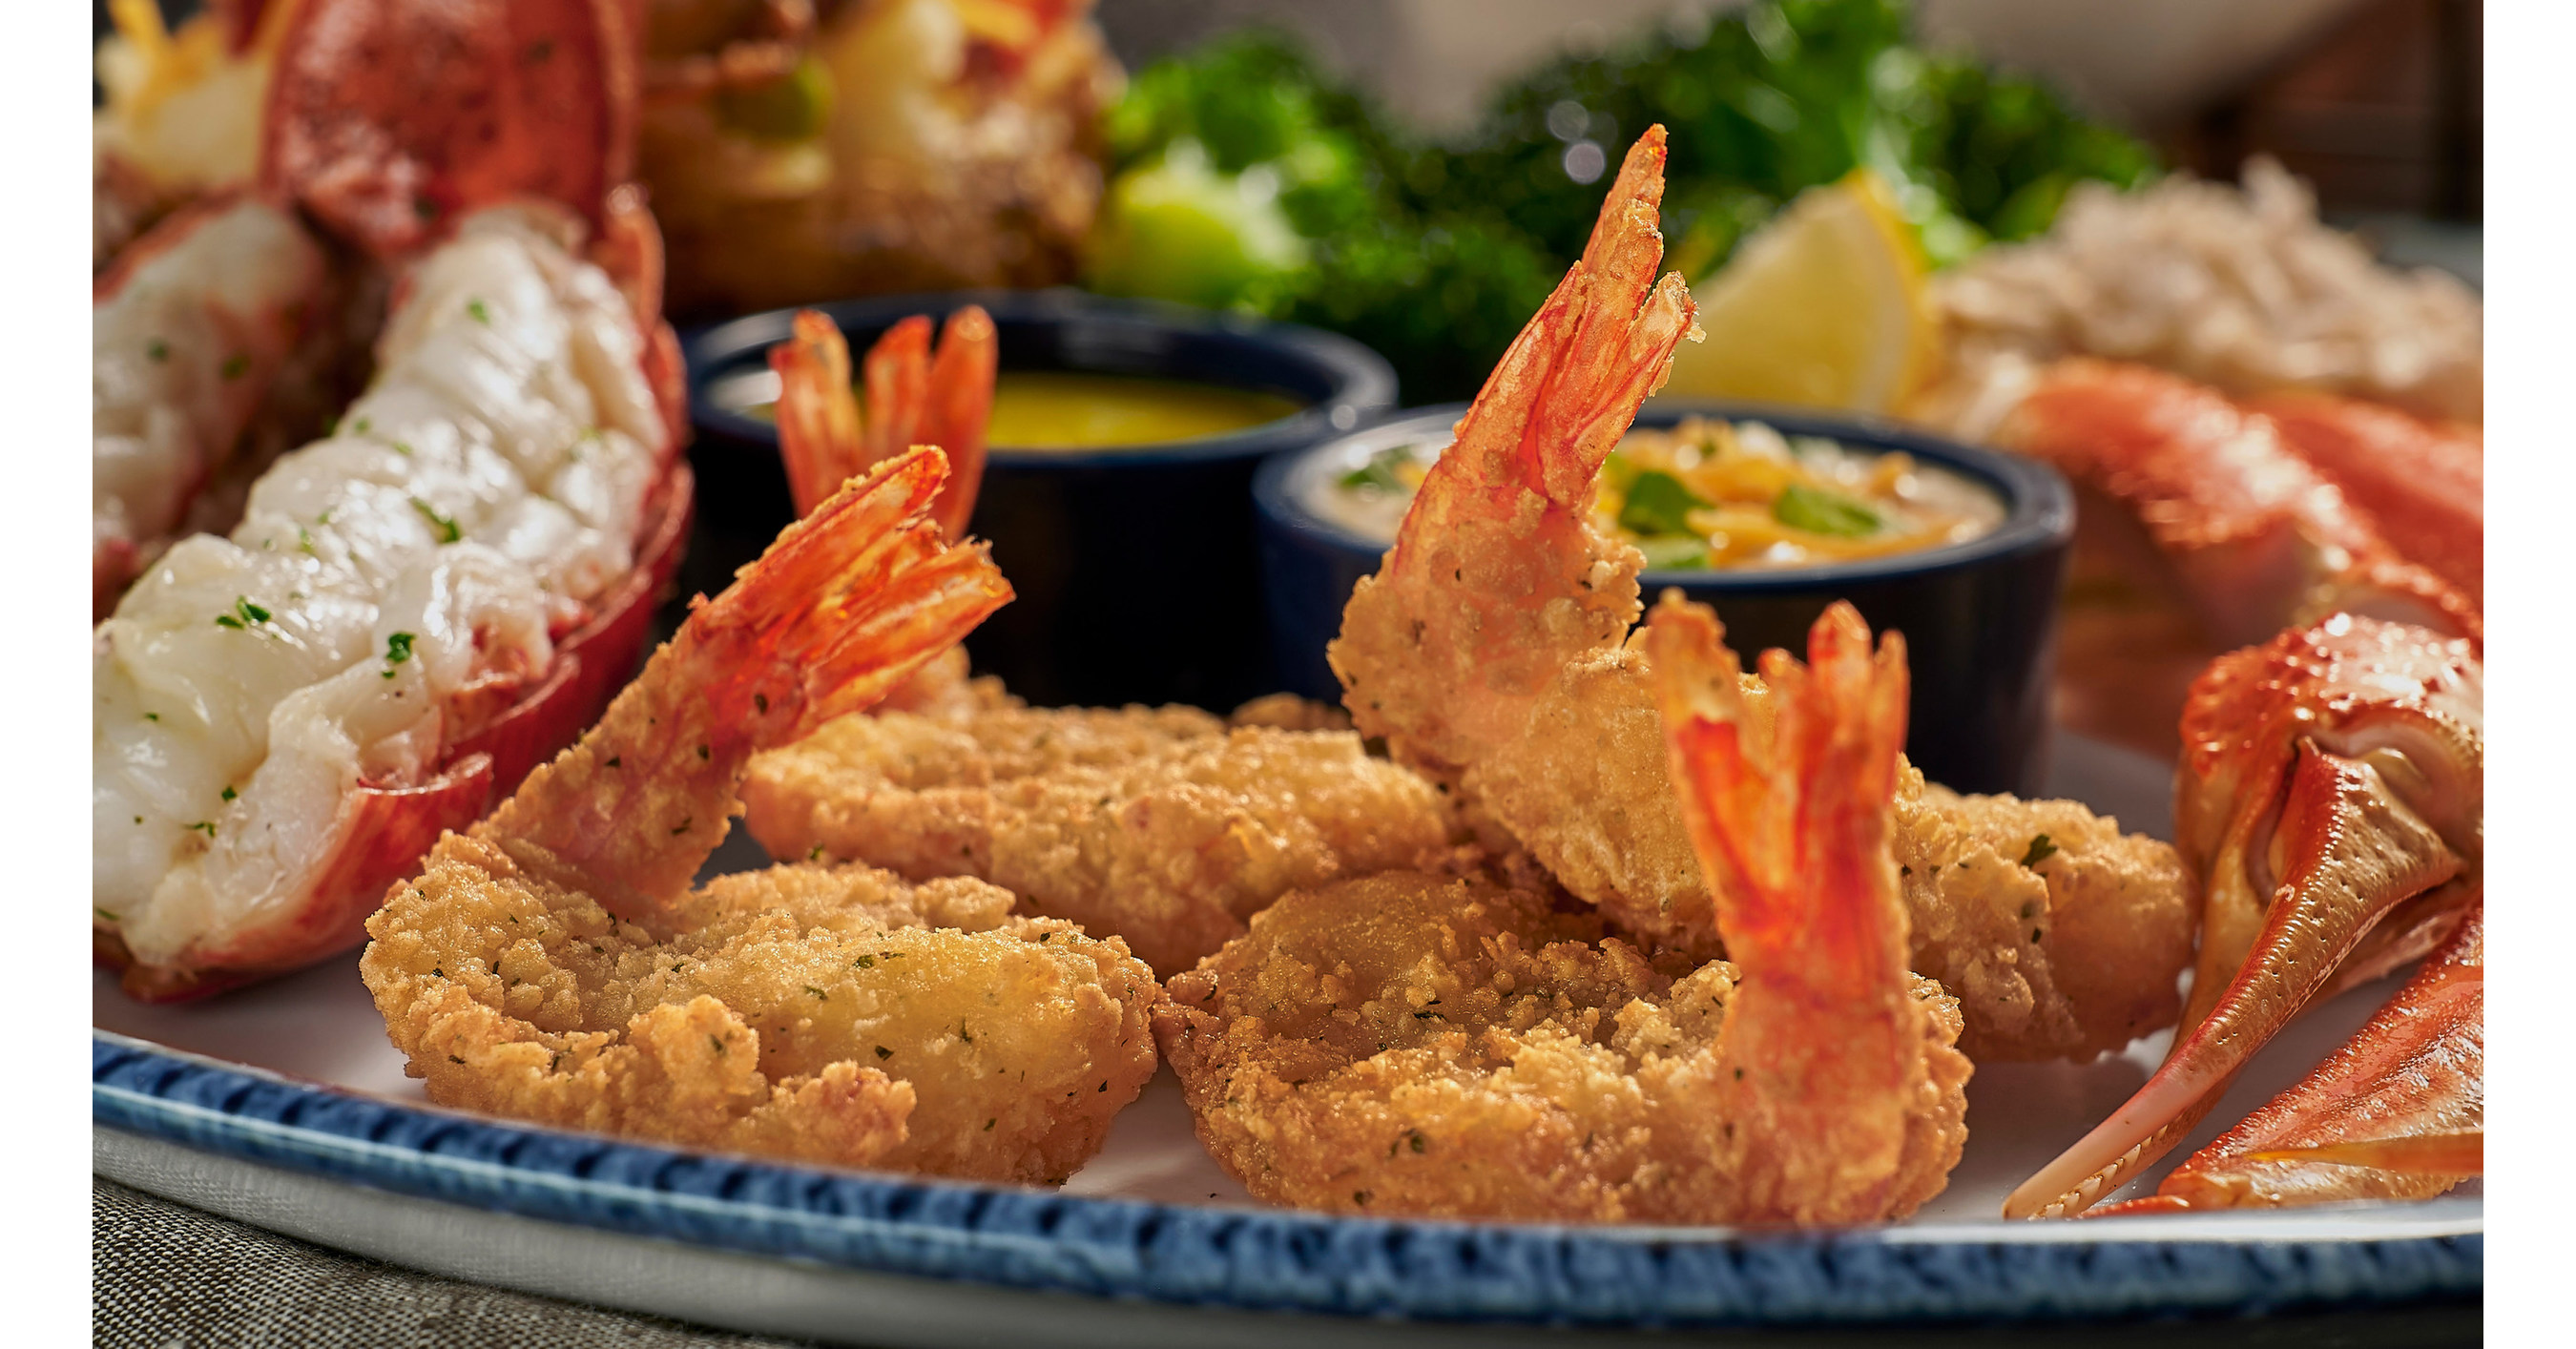 Red Lobster® Greatest Gift of the Season - NEW Cheddar Bay Shrimp™